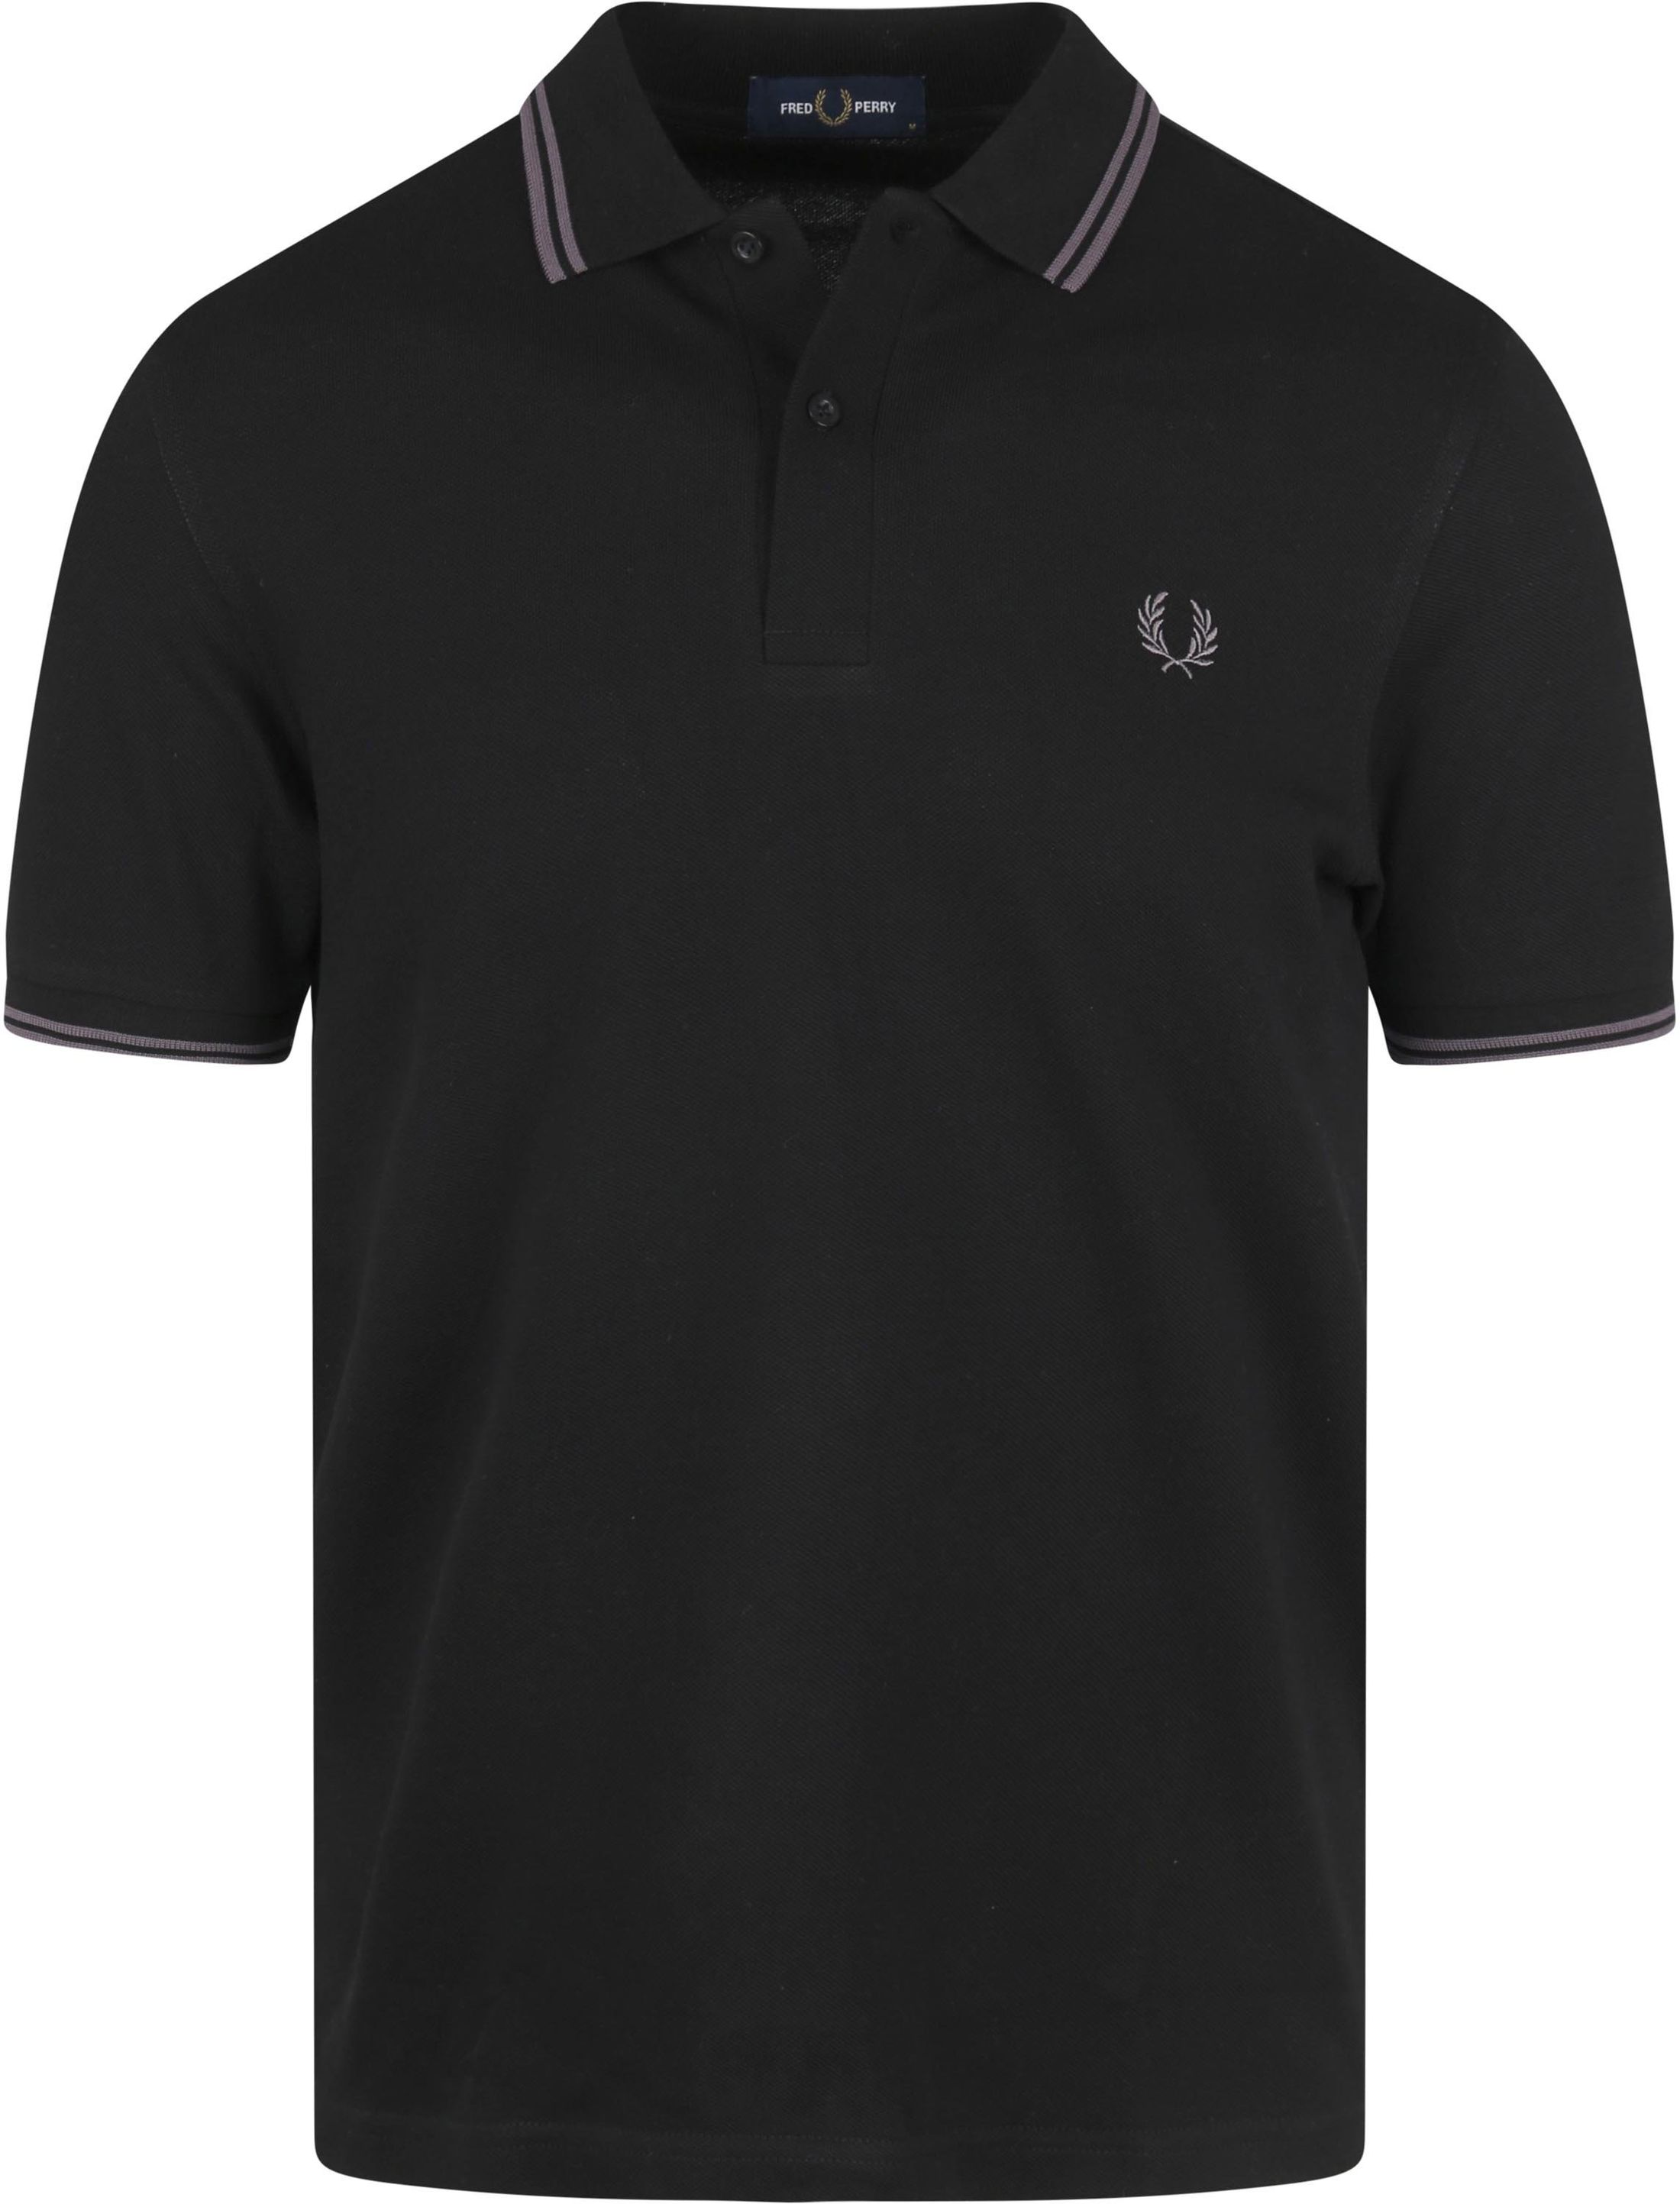 Fred Perry Polo Shirt P32 Black size M